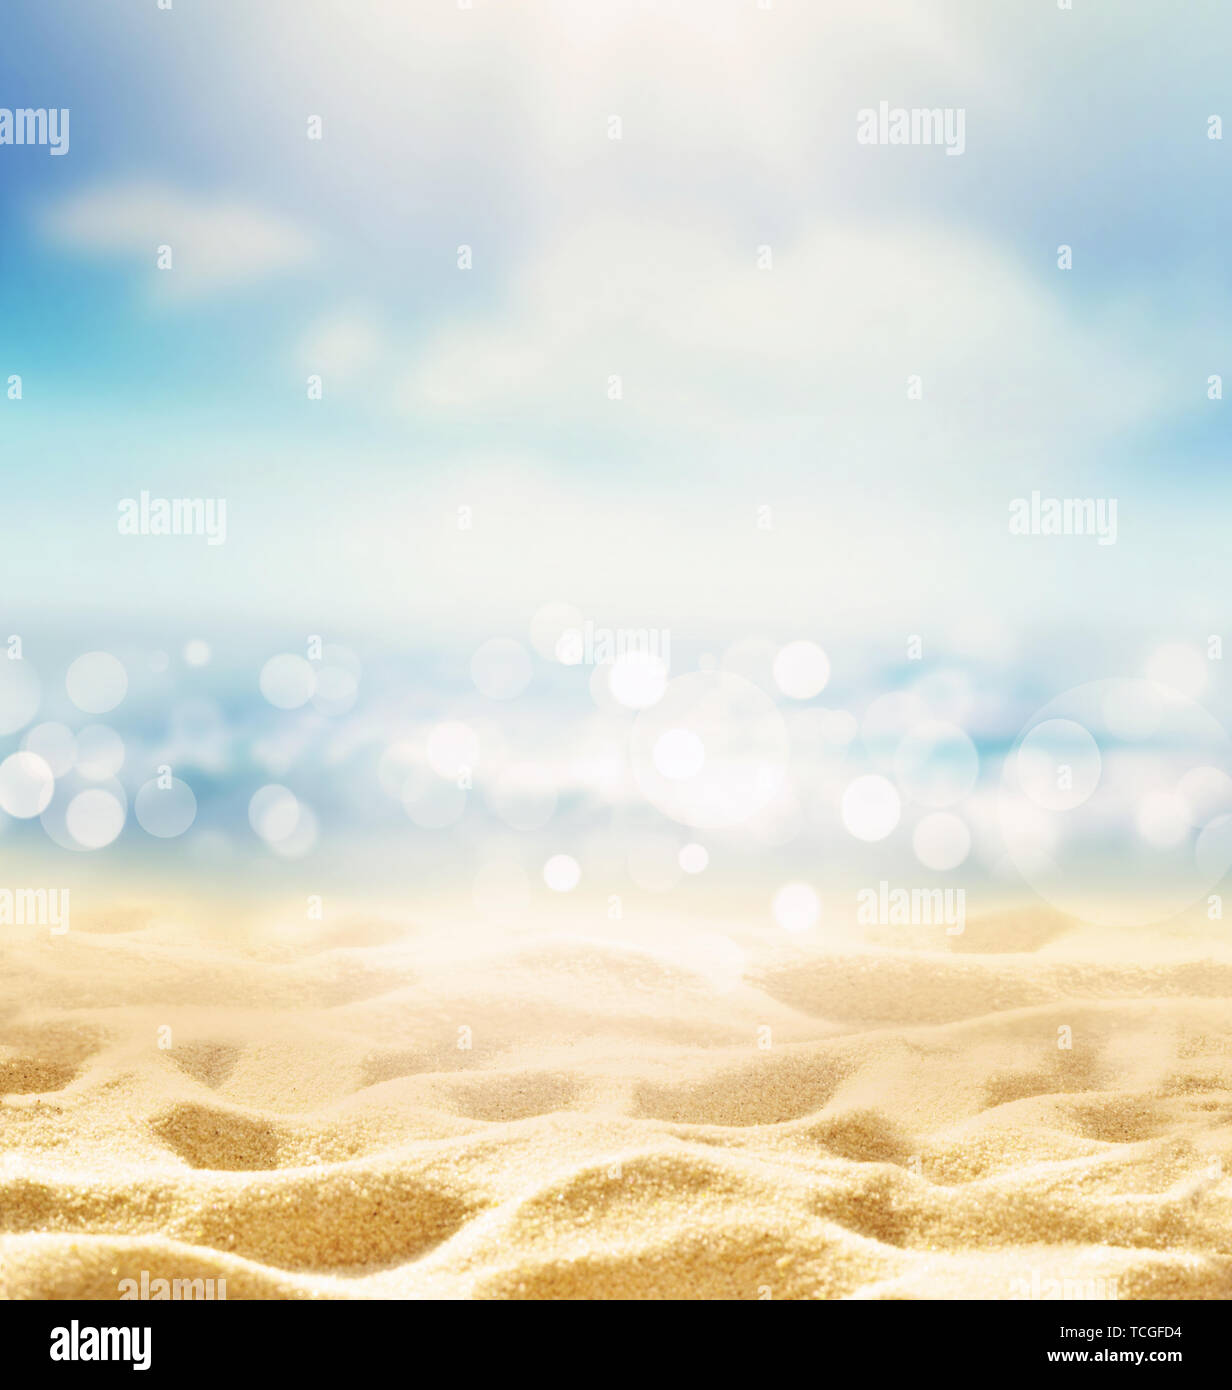 Summer beach background. Sand, sea and sky. Summer concept Stock Photo